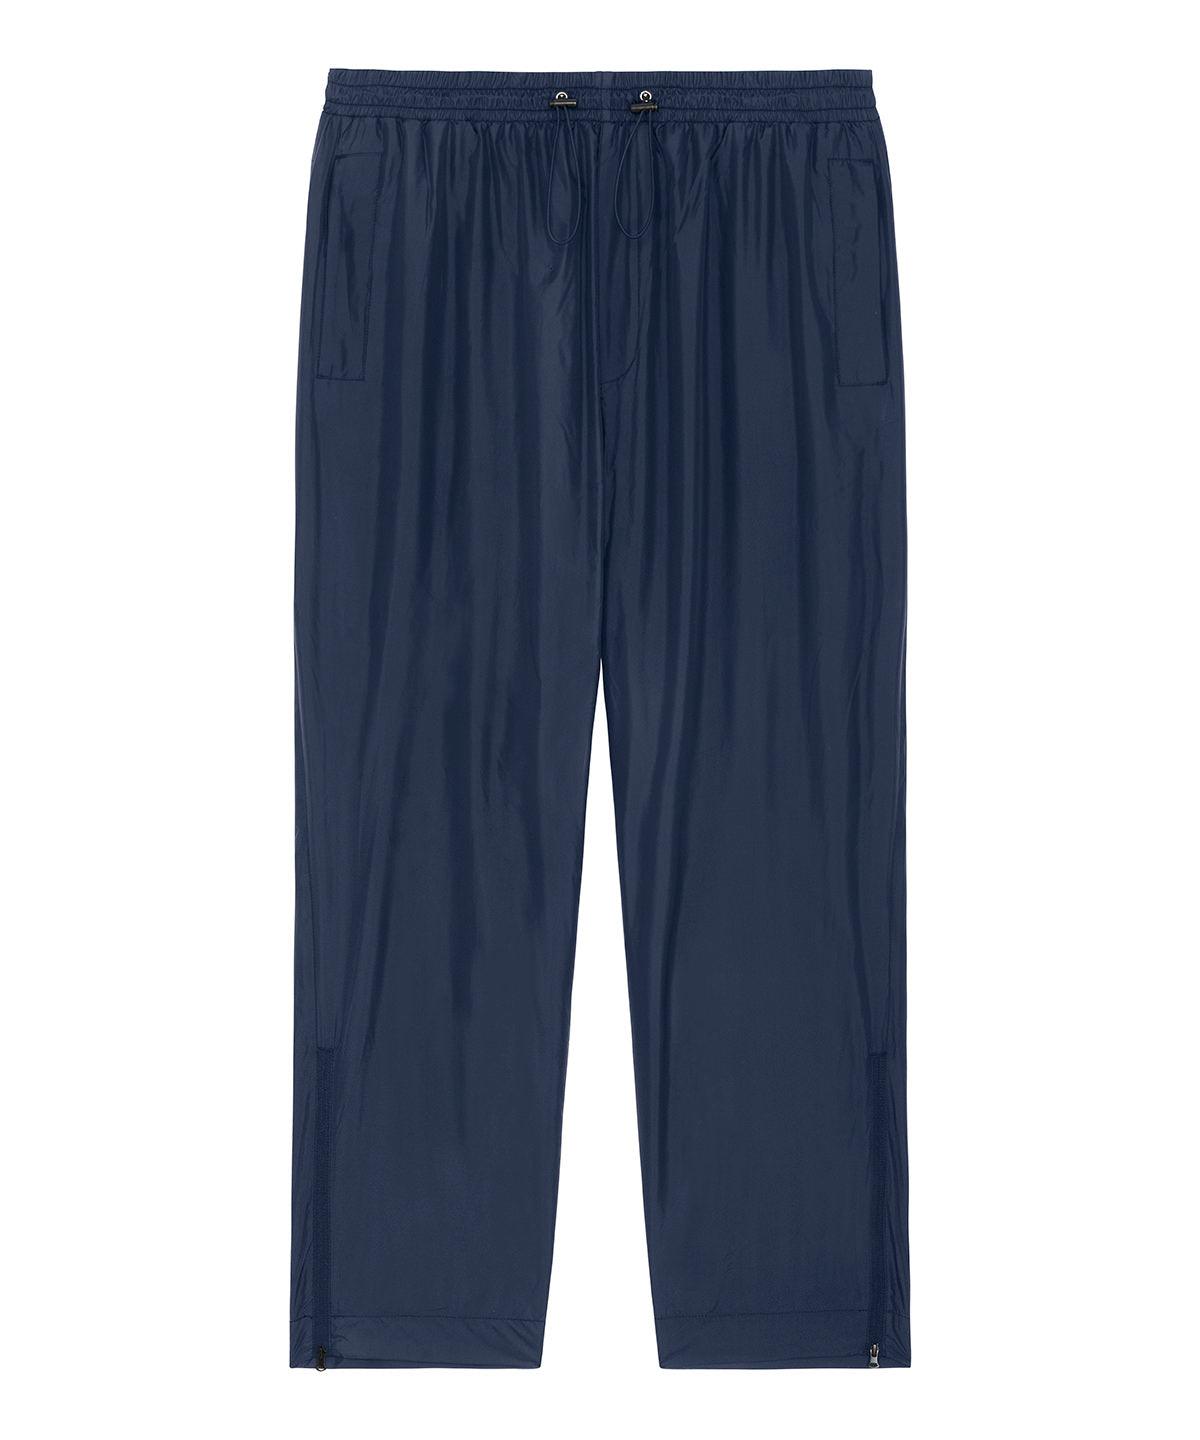 French Navy - Cycler multifunctional pants (STBU847) Trousers Stanley/Stella Exclusives, New Styles For 2022, Organic & Conscious, Stanley/ Stella, Streetwear, Trousers & Shorts Schoolwear Centres